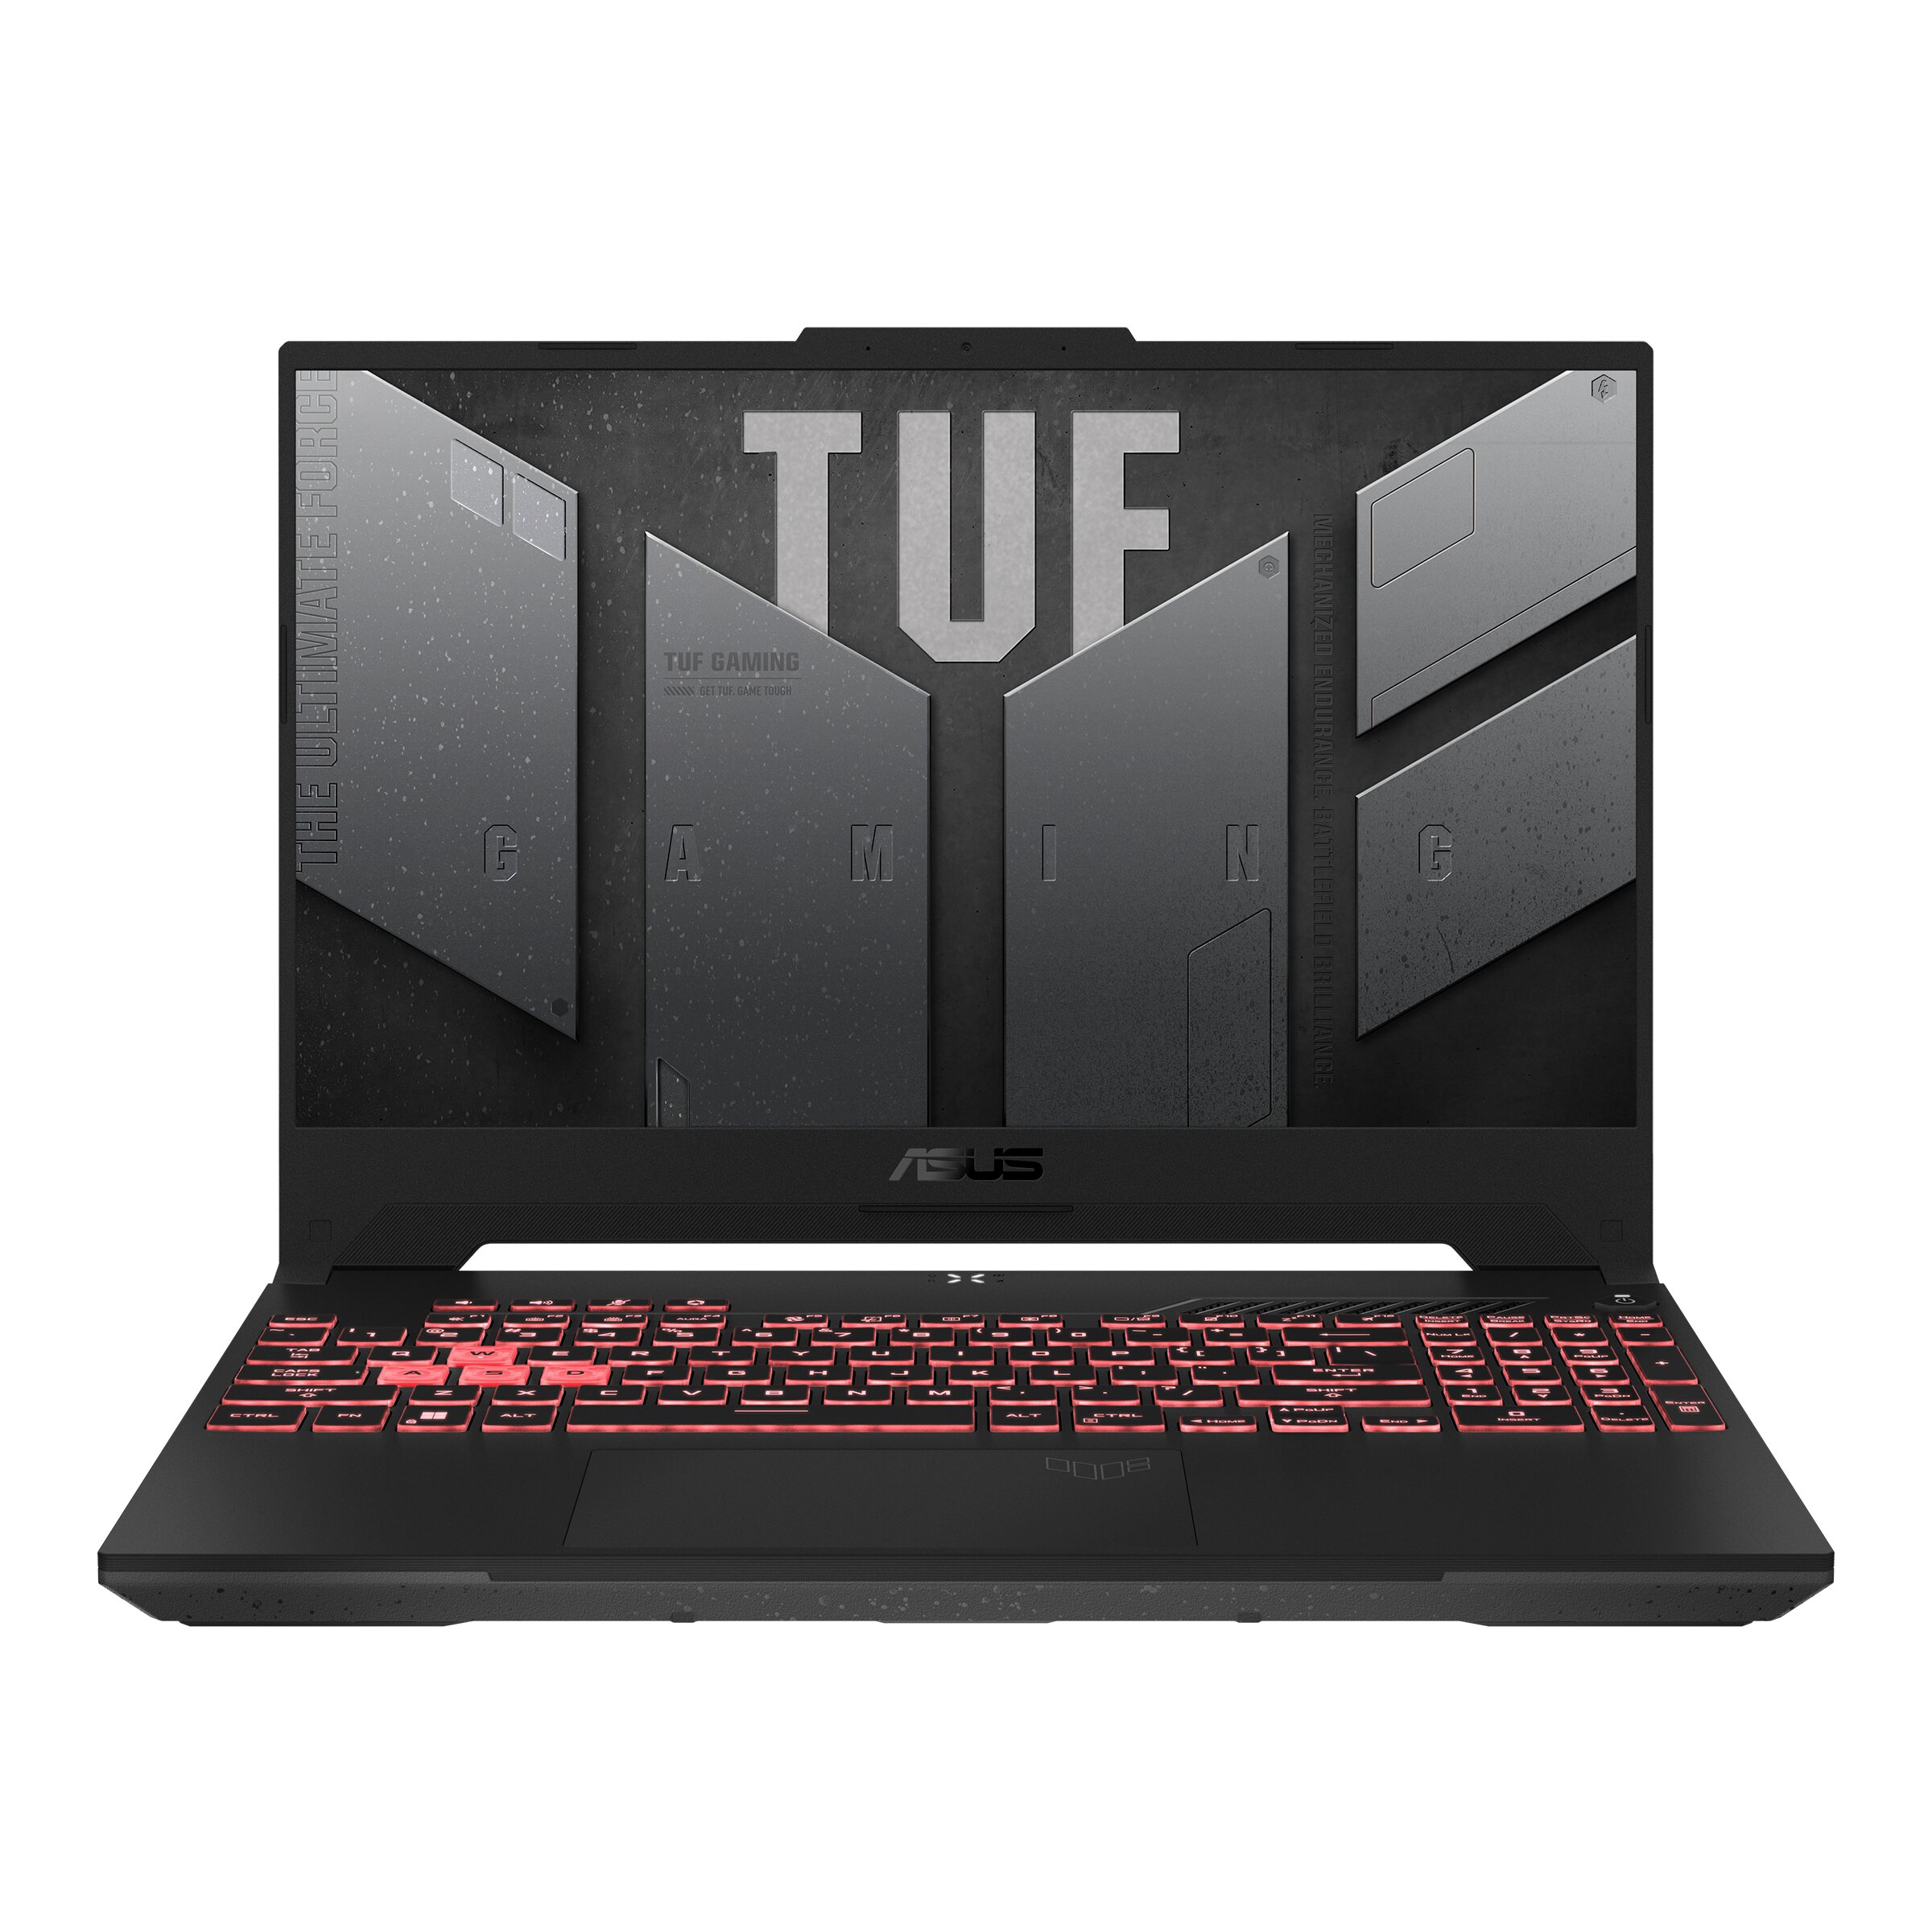 NOTEBOOK ASUS GAMING FA507RC-HN050 AMD RYZEN R7-6800H 3.2GHz UP TO 4.7GHz 20M 16G 512SSD VGA NVIDIA 4G RTX3050 GDDR6 15.6 WIN11 GRAY ,Laptop Pc